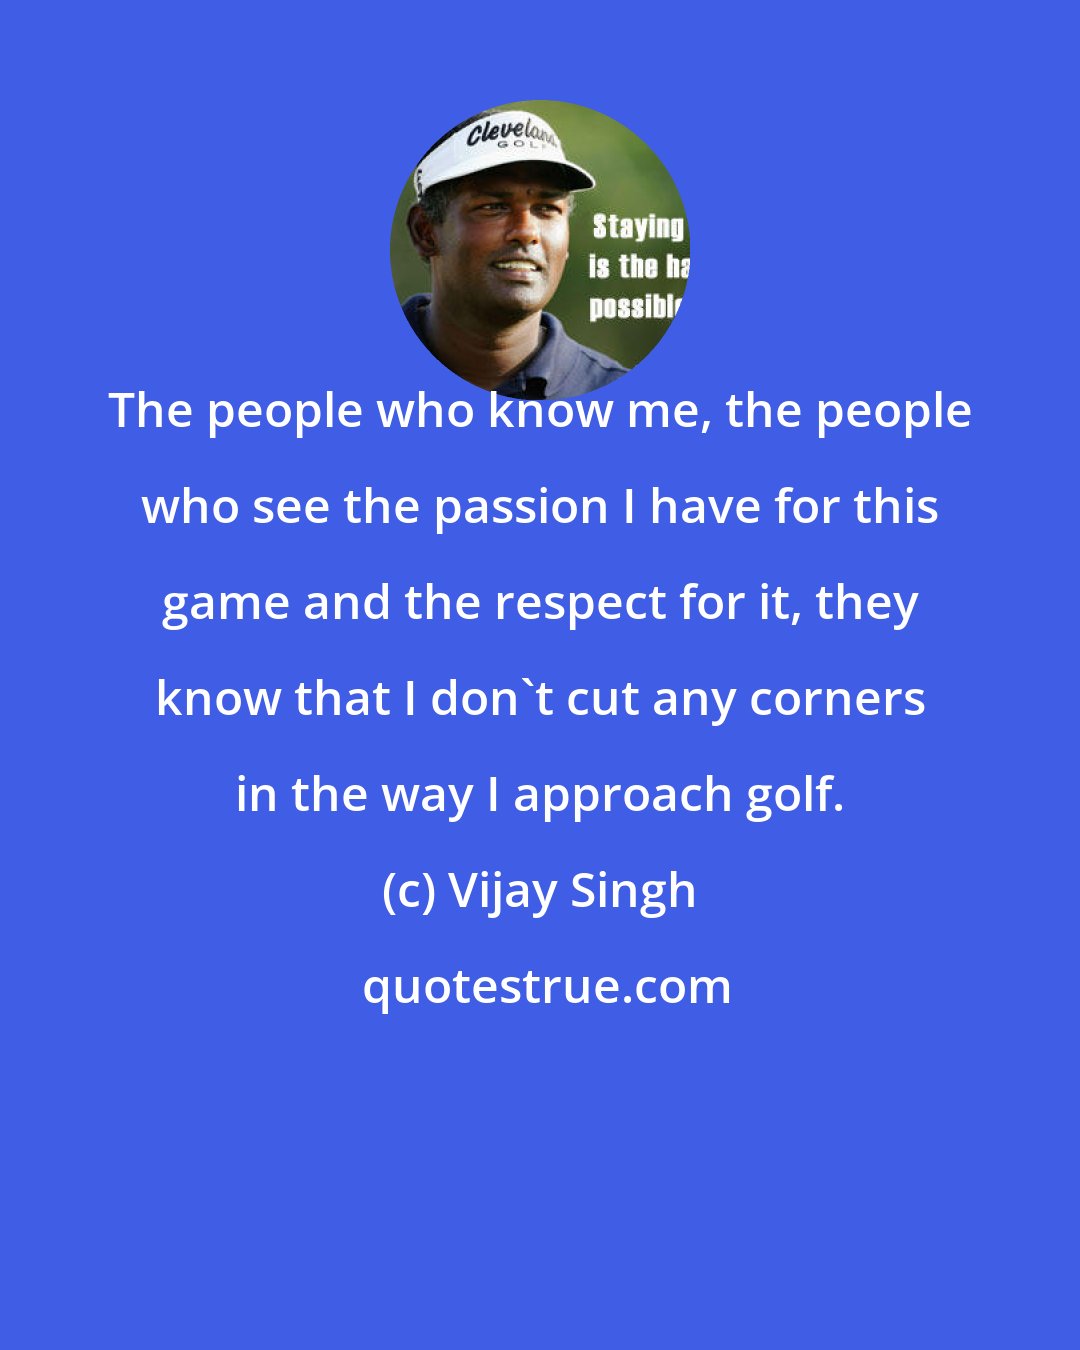 Vijay Singh: The people who know me, the people who see the passion I have for this game and the respect for it, they know that I don't cut any corners in the way I approach golf.